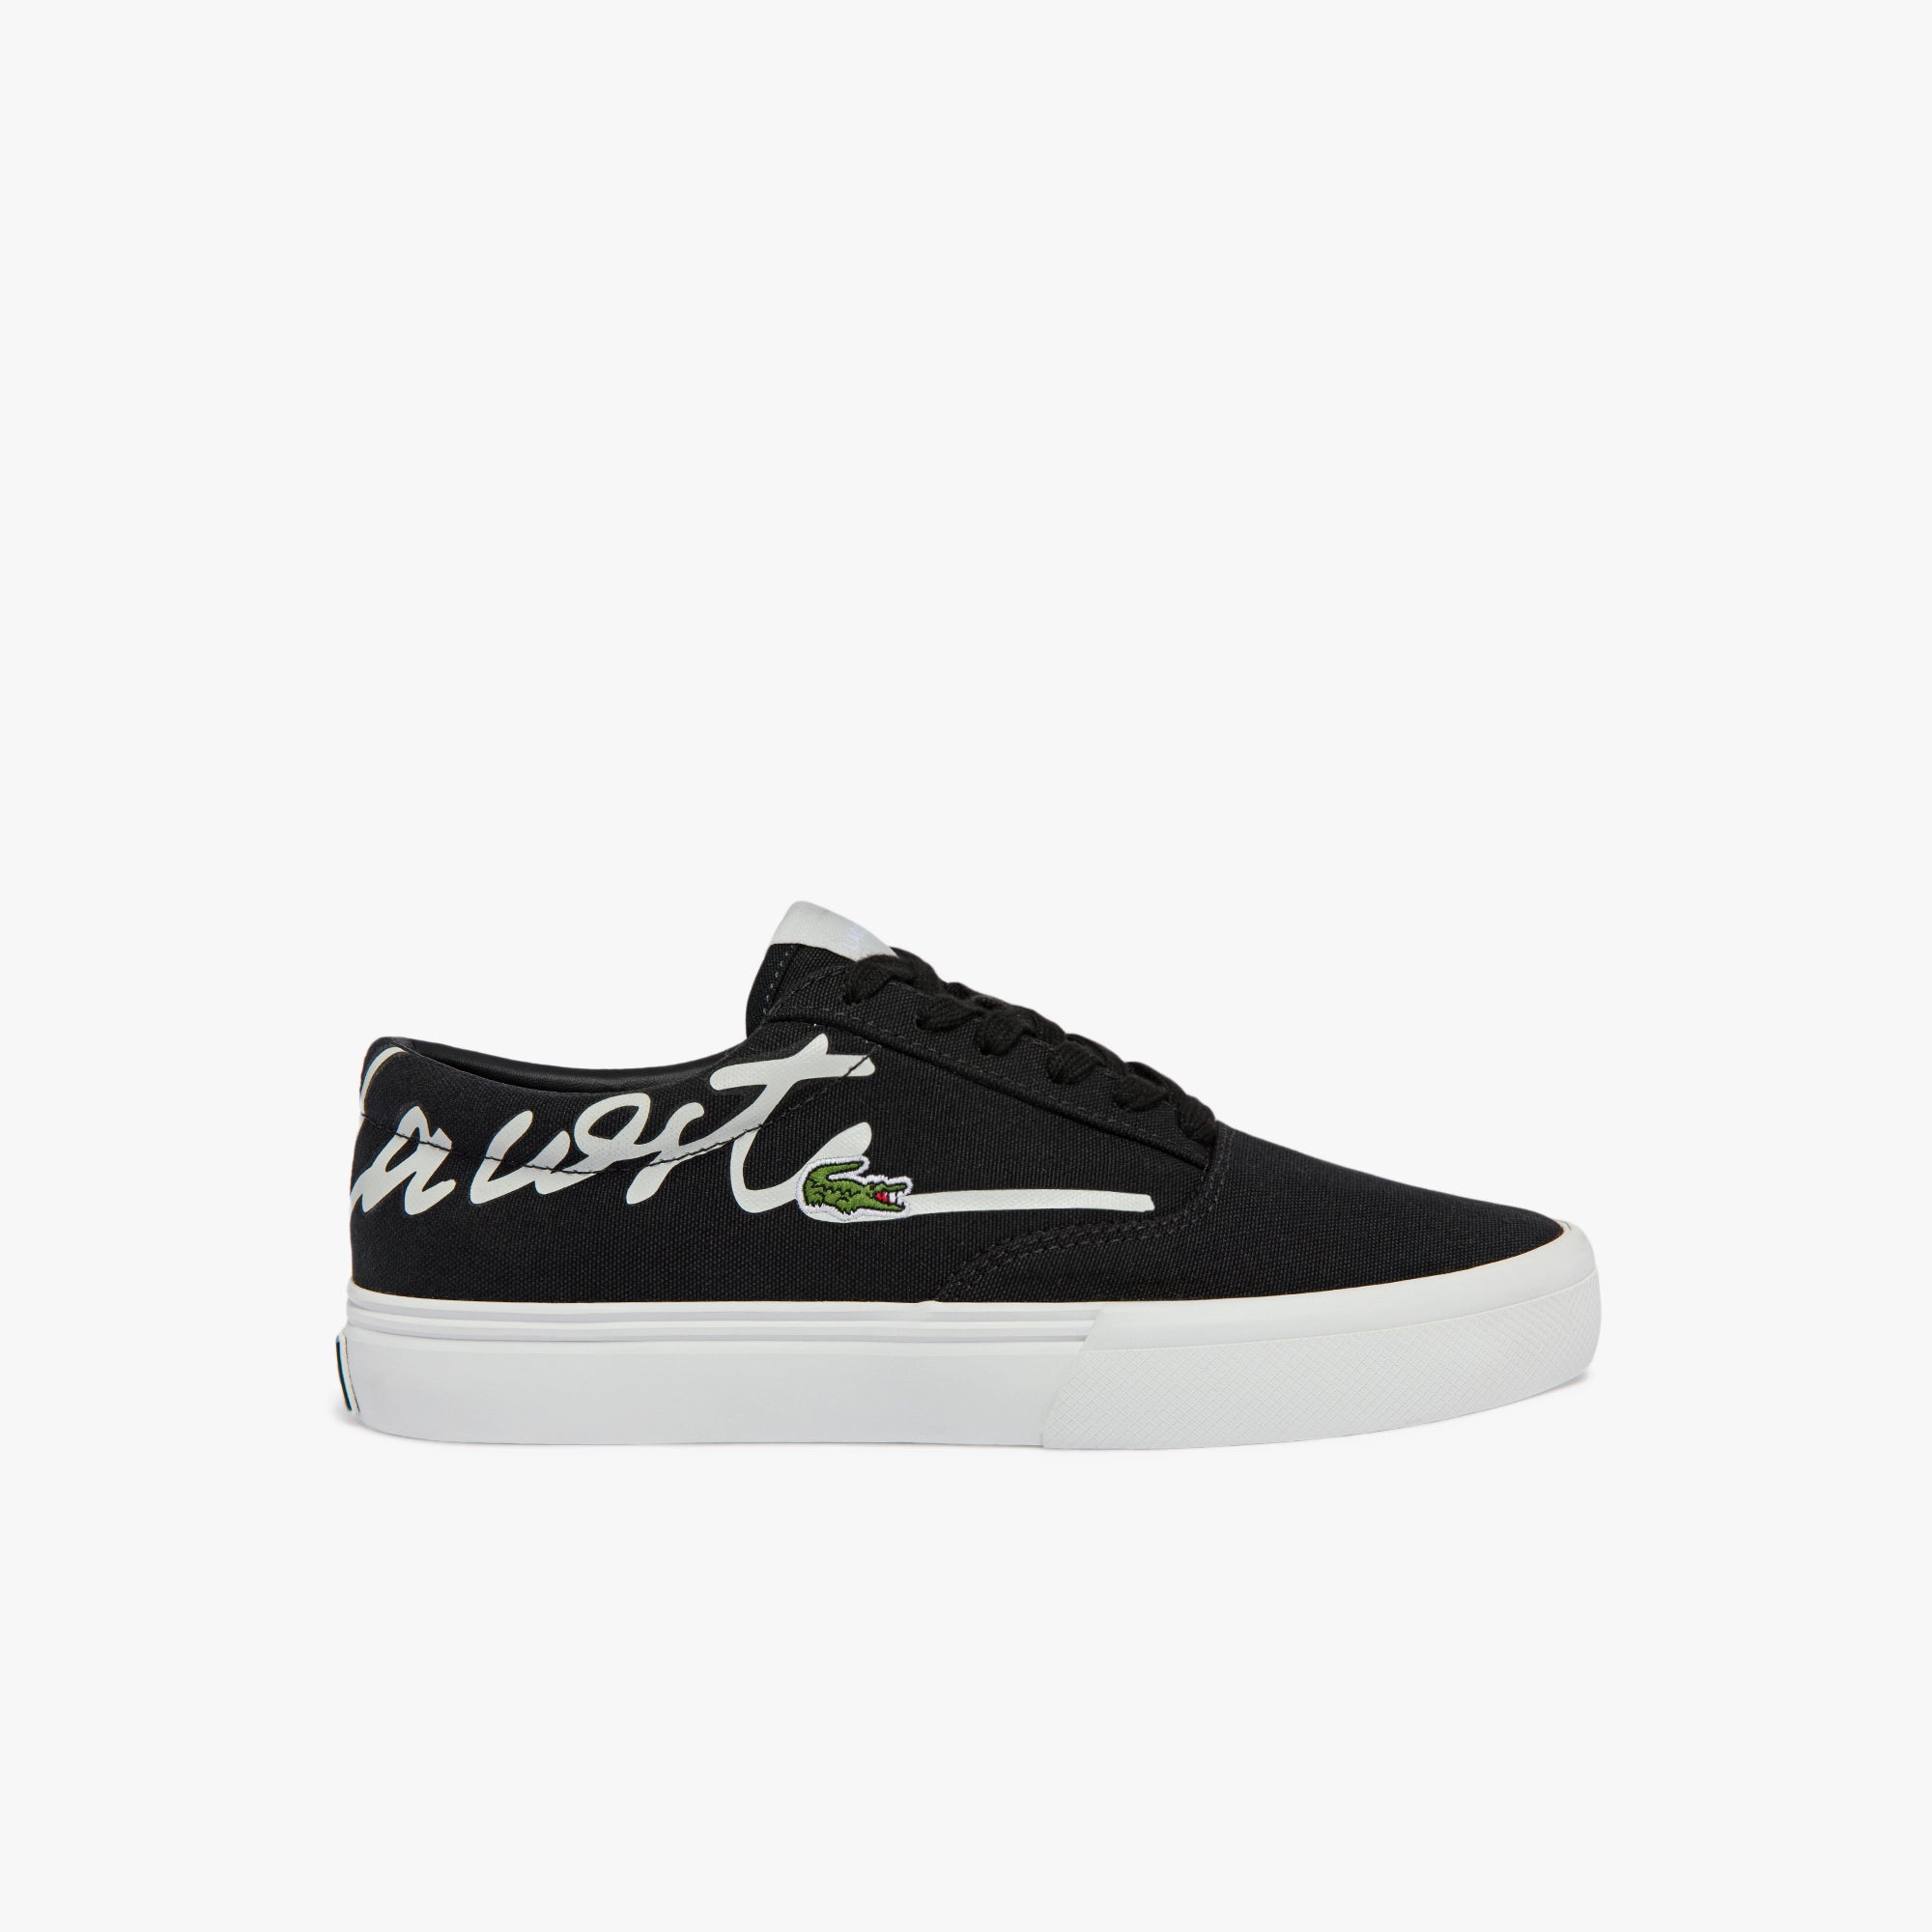 Jump Serve Lace Canvas Black/off White Sneakers